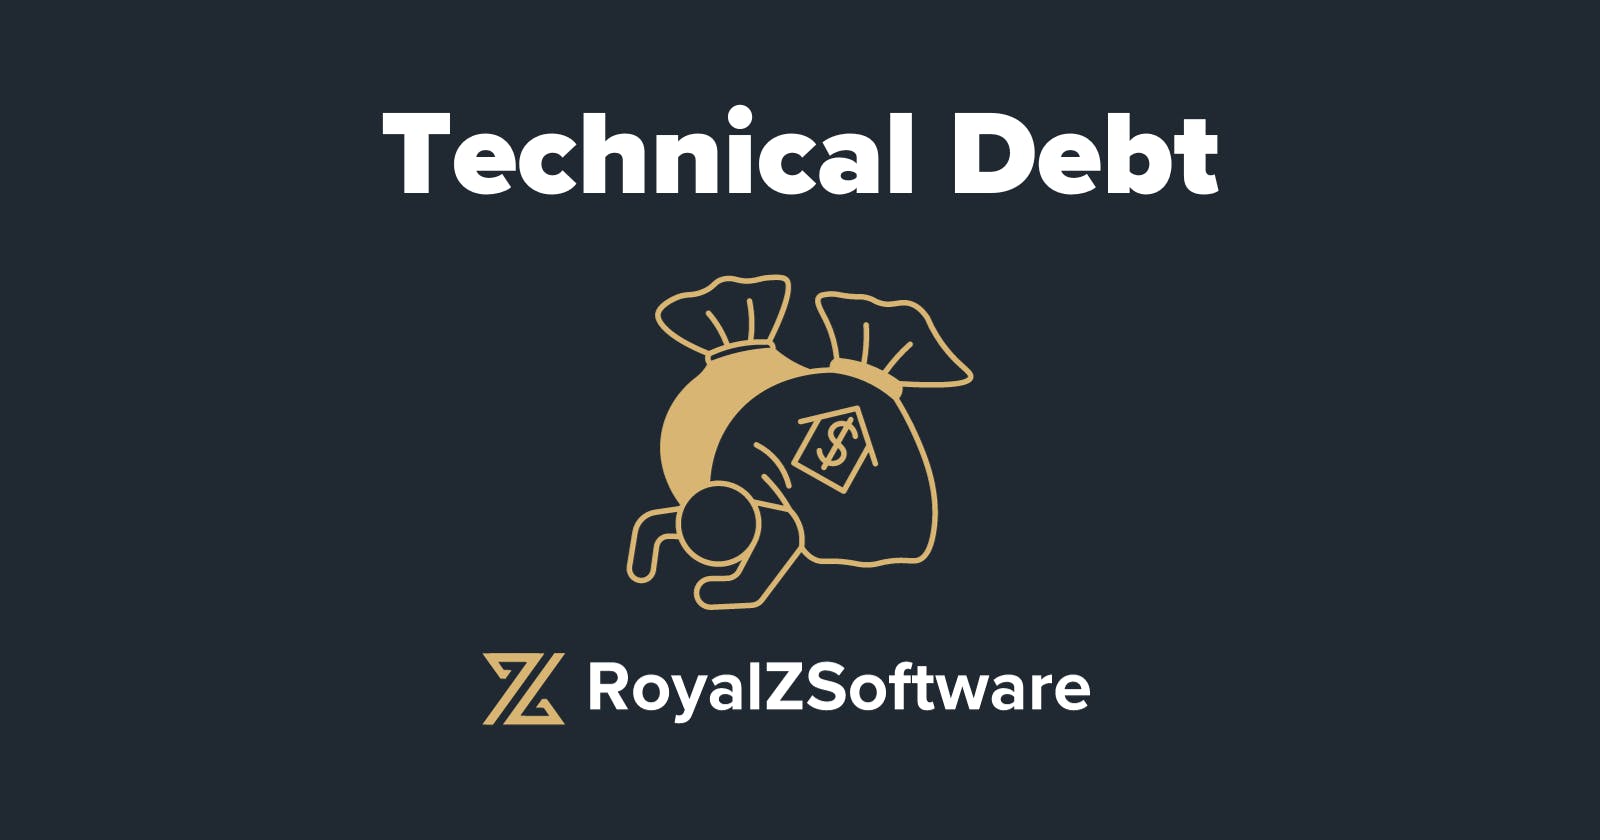 Technical Debt - what it's all about and how to prevent it